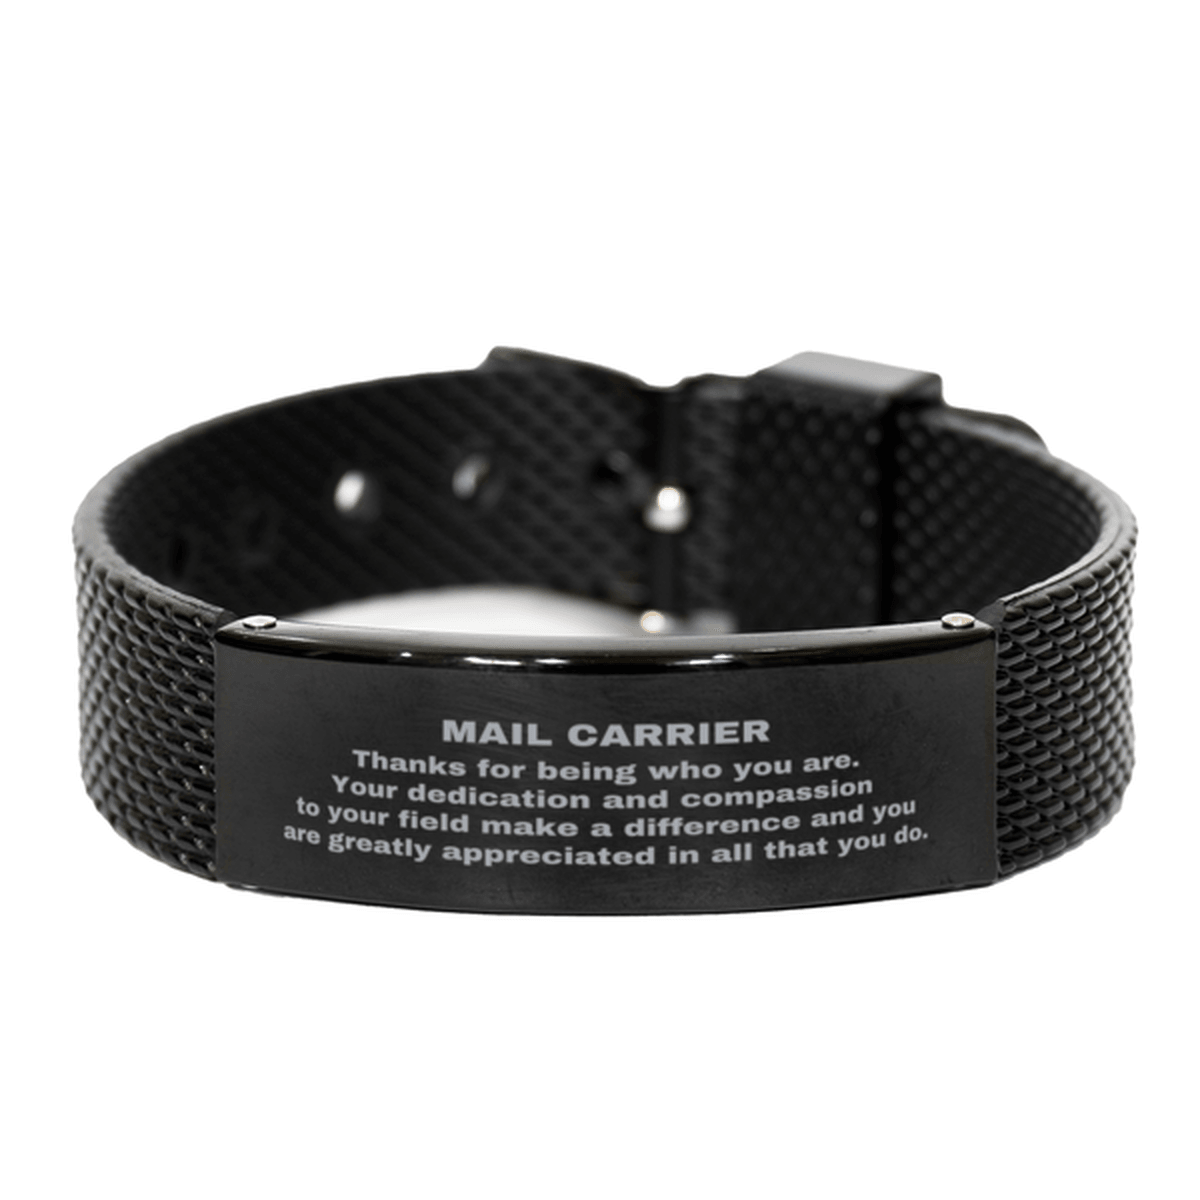 Mail Carrier Black Shark Mesh Stainless Steel Engraved Bracelet - Thanks for being who you are - Birthday Christmas Jewelry Gifts Coworkers Colleague Boss - Mallard Moon Gift Shop